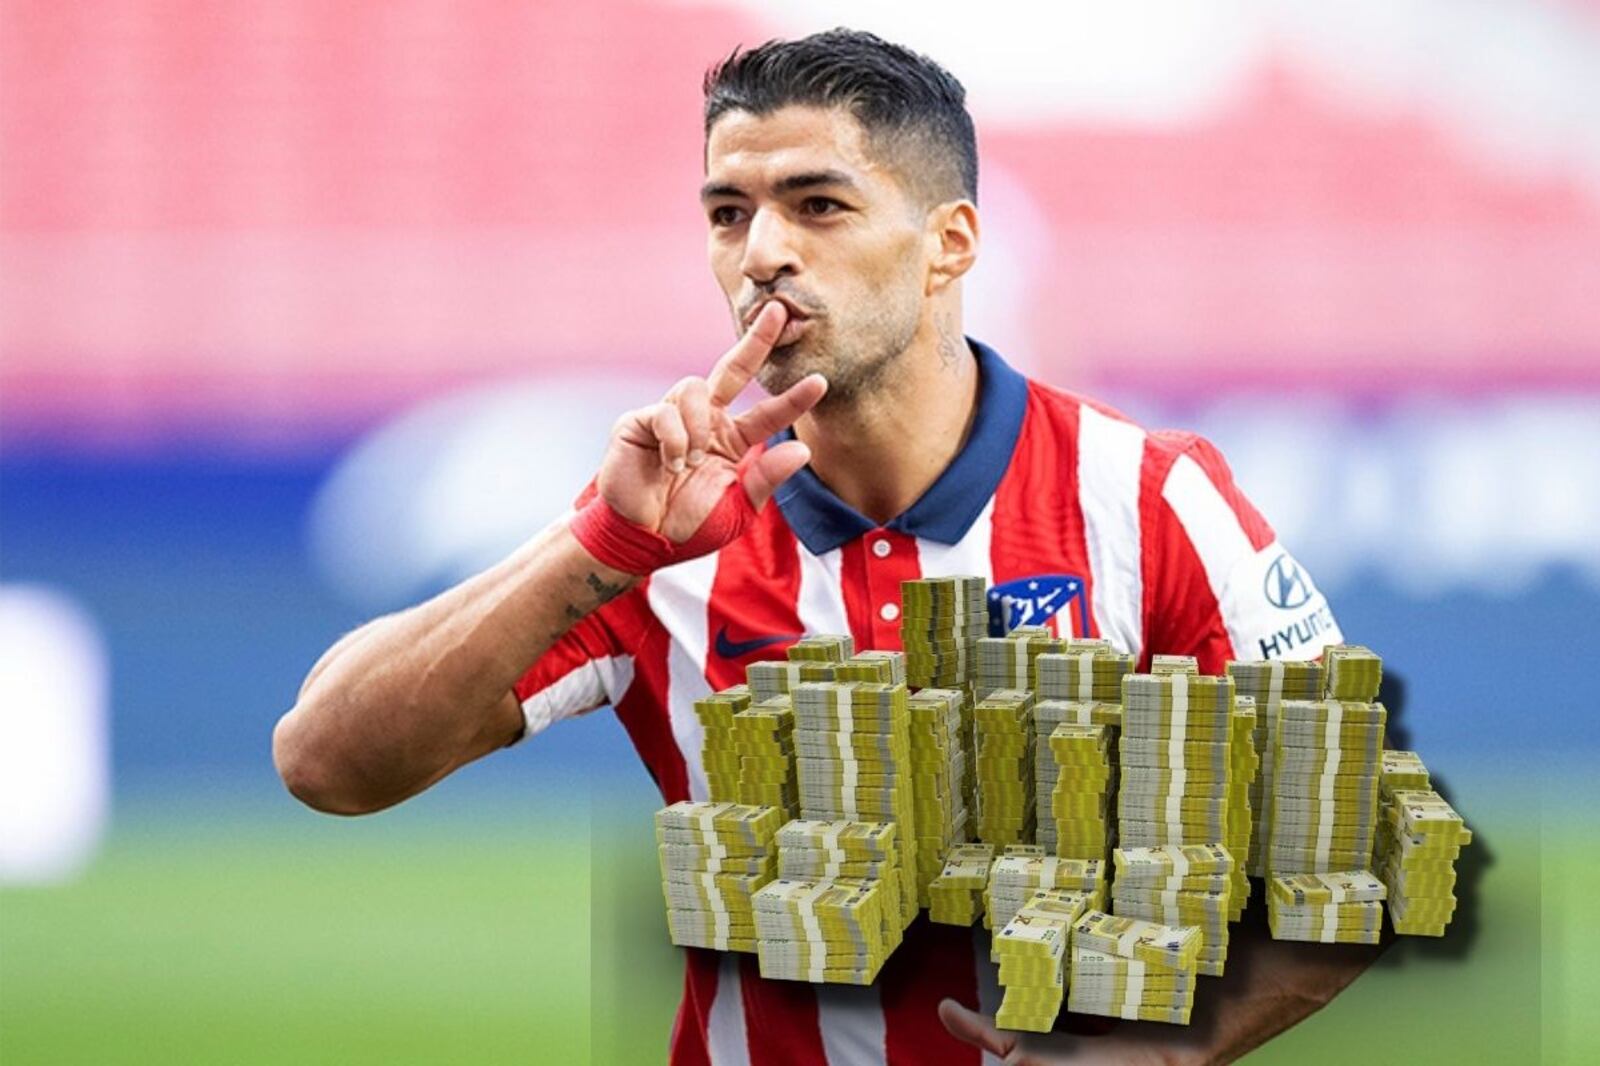 They call him the new Suárez, he is worth 2 million and dreams of playing for Atleti